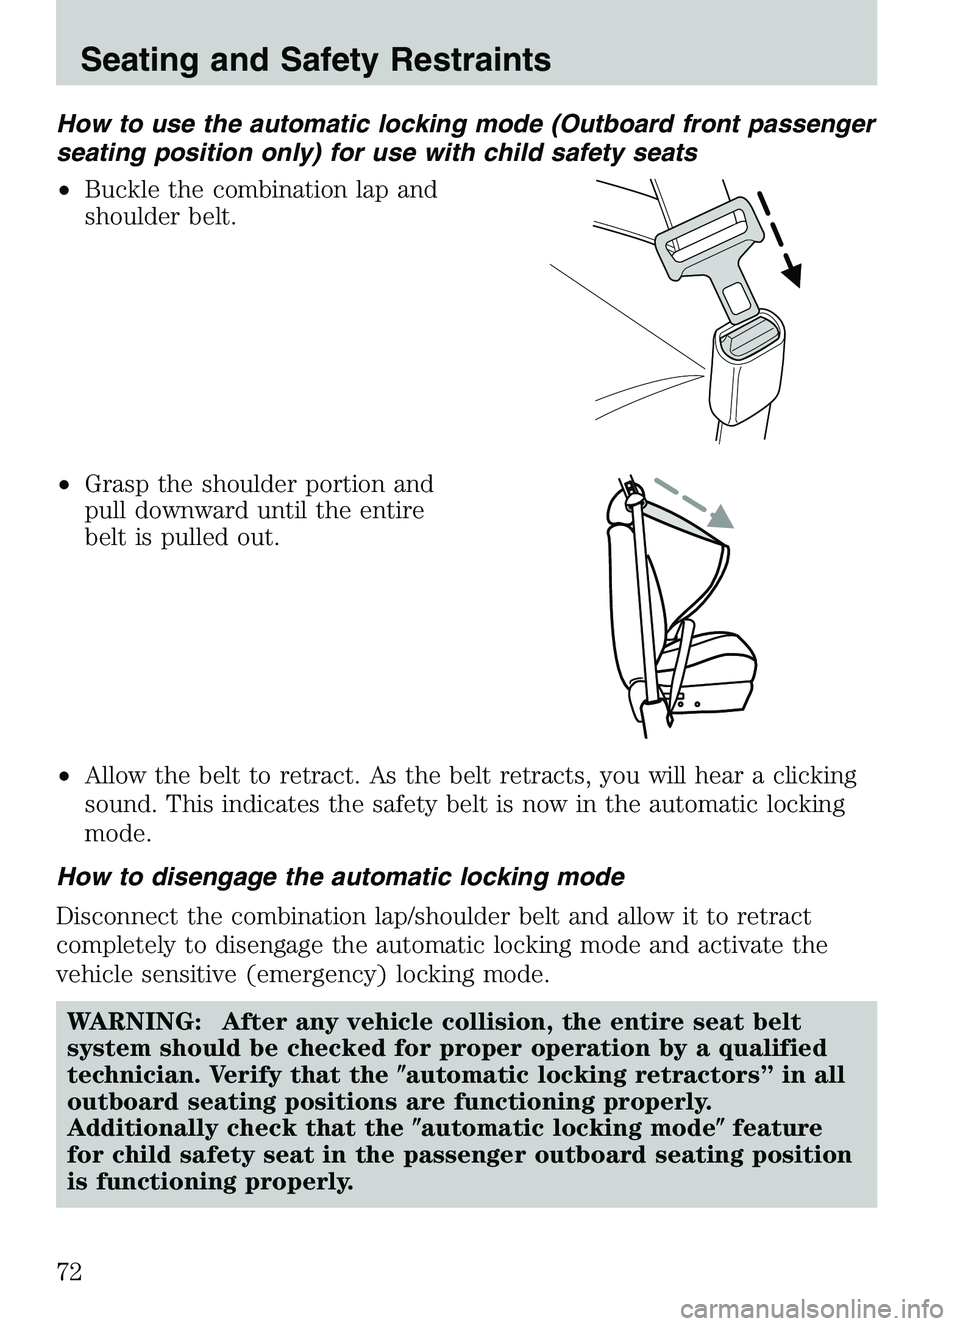 MAZDA MODEL B4000 4WD 2003  Owners Manual How to use the automatic locking mode (Outboard front passenger
seating position only) for use with child safety seats
•Buckle the combination lap and
shoulder belt.
• Grasp the shoulder portion a